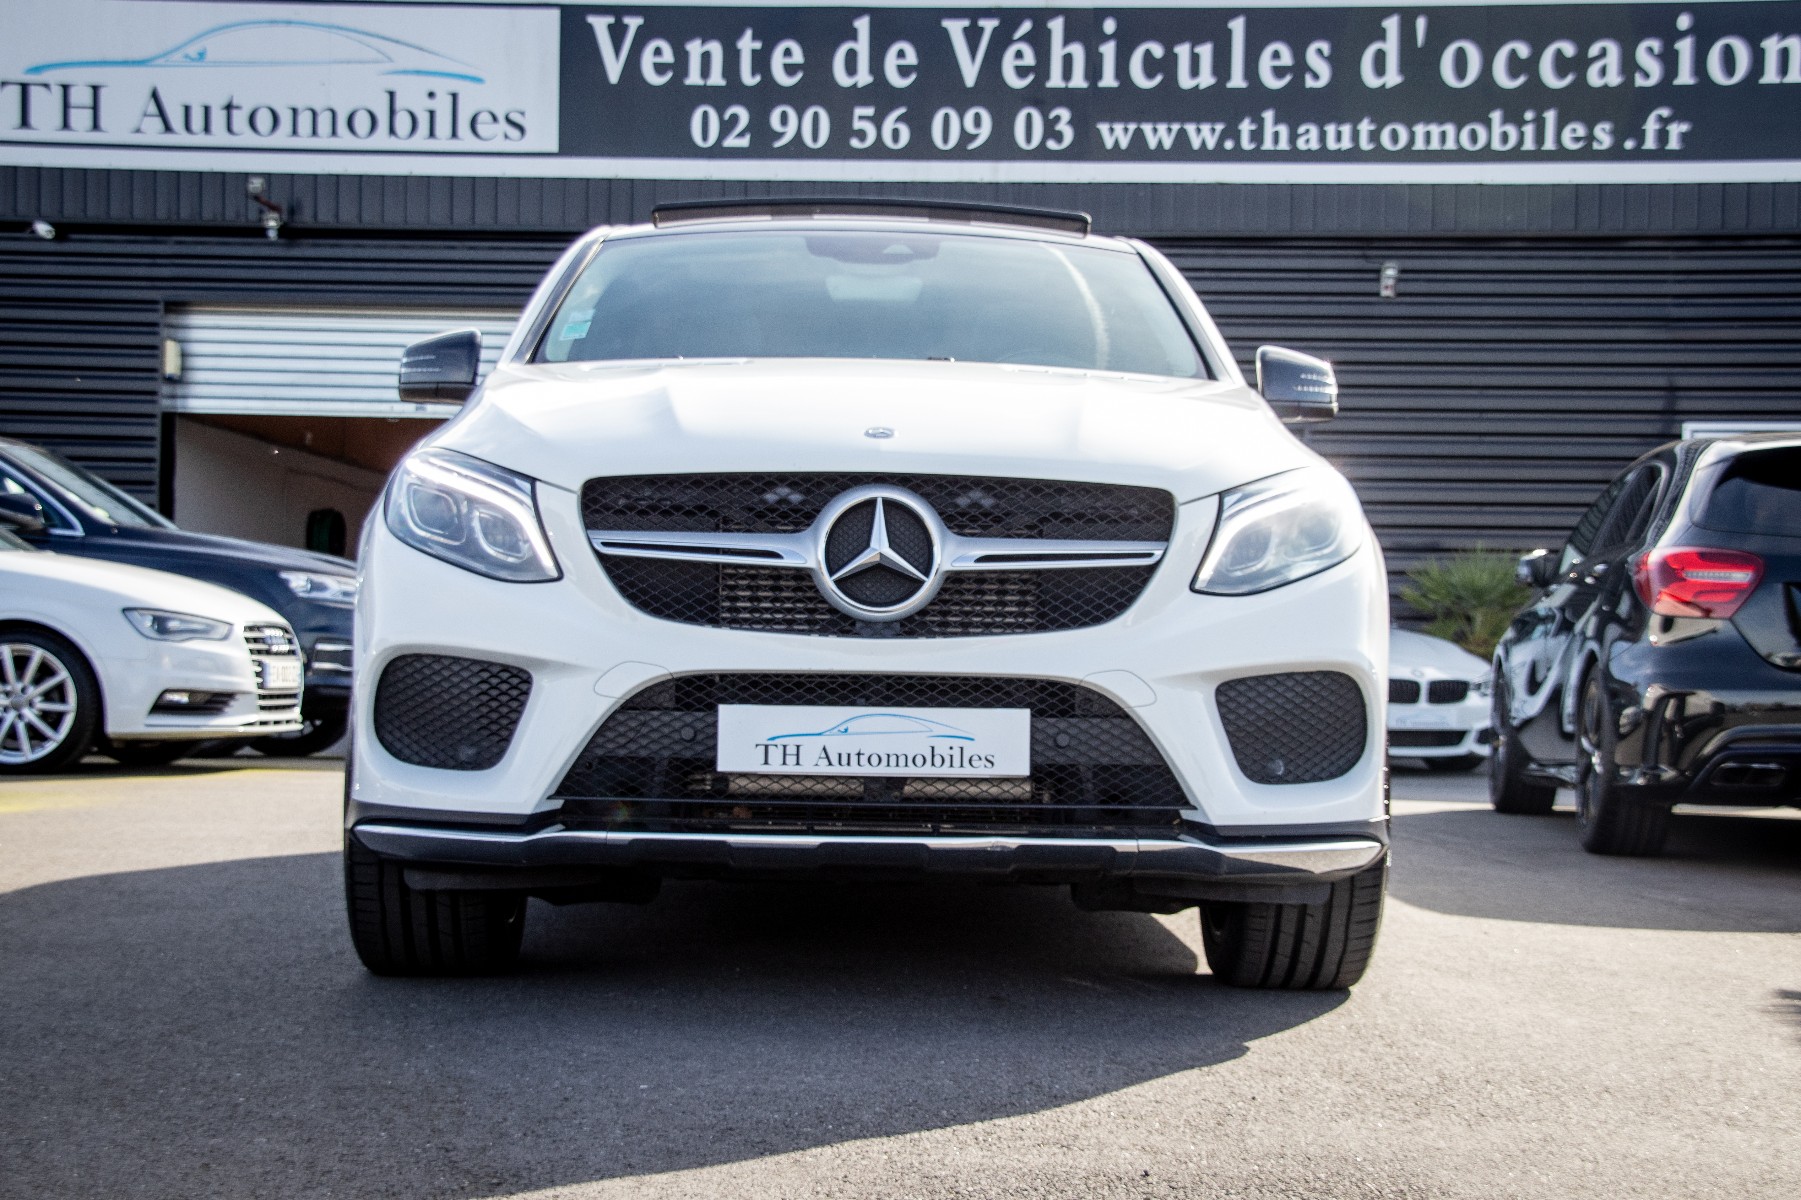 MERCEDES GLE COUPE 350D SPORTLINE 258ch 4MATIC 9G-tronic